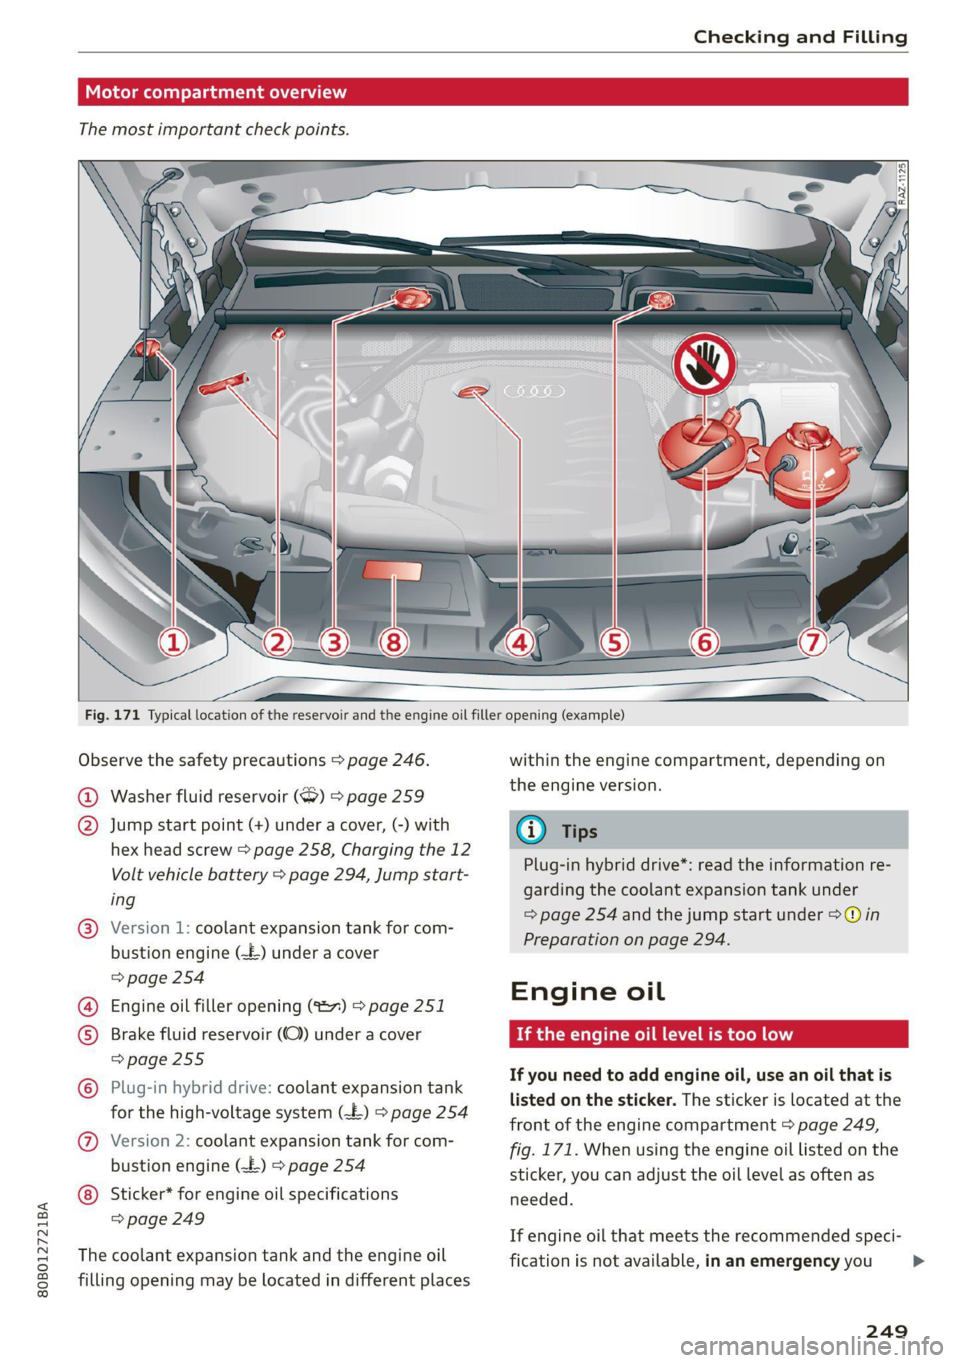 AUDI Q5 2021  Owner´s Manual 80B012721BA 
Checking and Filling 
  
Col kel mel nator Tadnat-lal ae) lav (7 
  
The most important check points. 
  
  
  
Fig. 171 Typical location of the reservoir and the engine oil filler openin